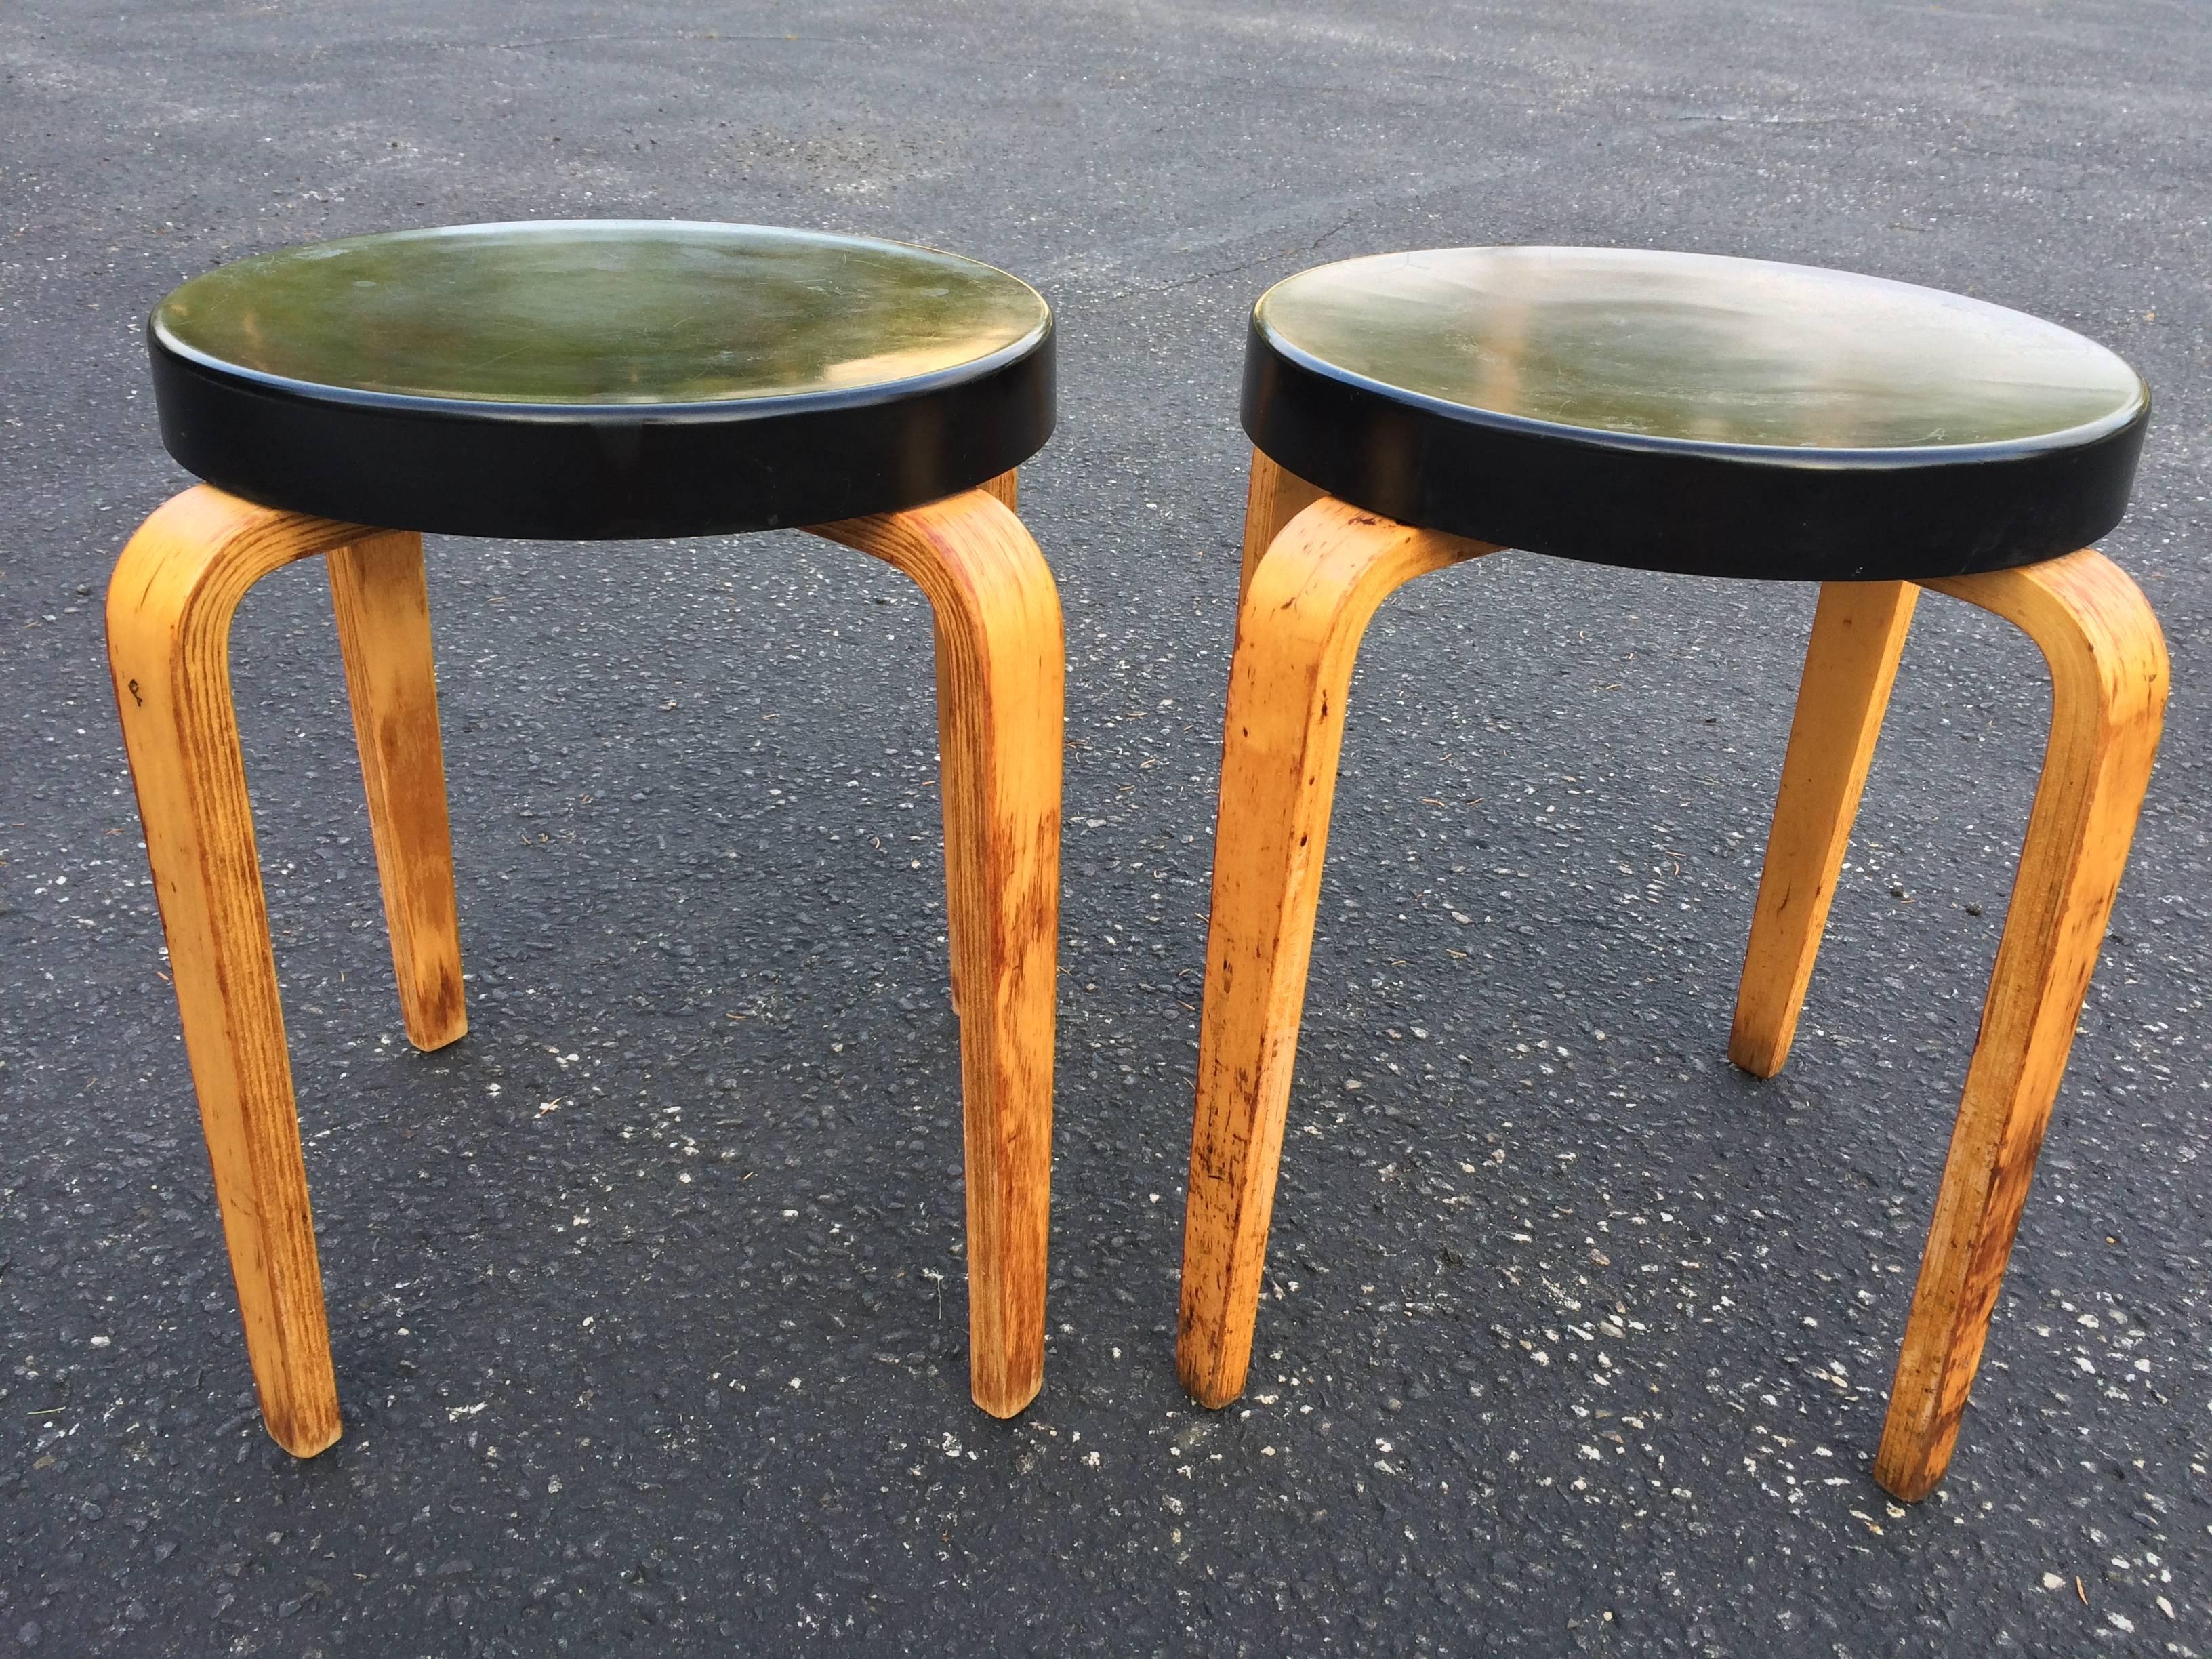 Pair of authentic Thonet stacking stool tables. Classic black hard plastic top with bentwood legs. Signed Thonet underneath. One stool table has a slight 6